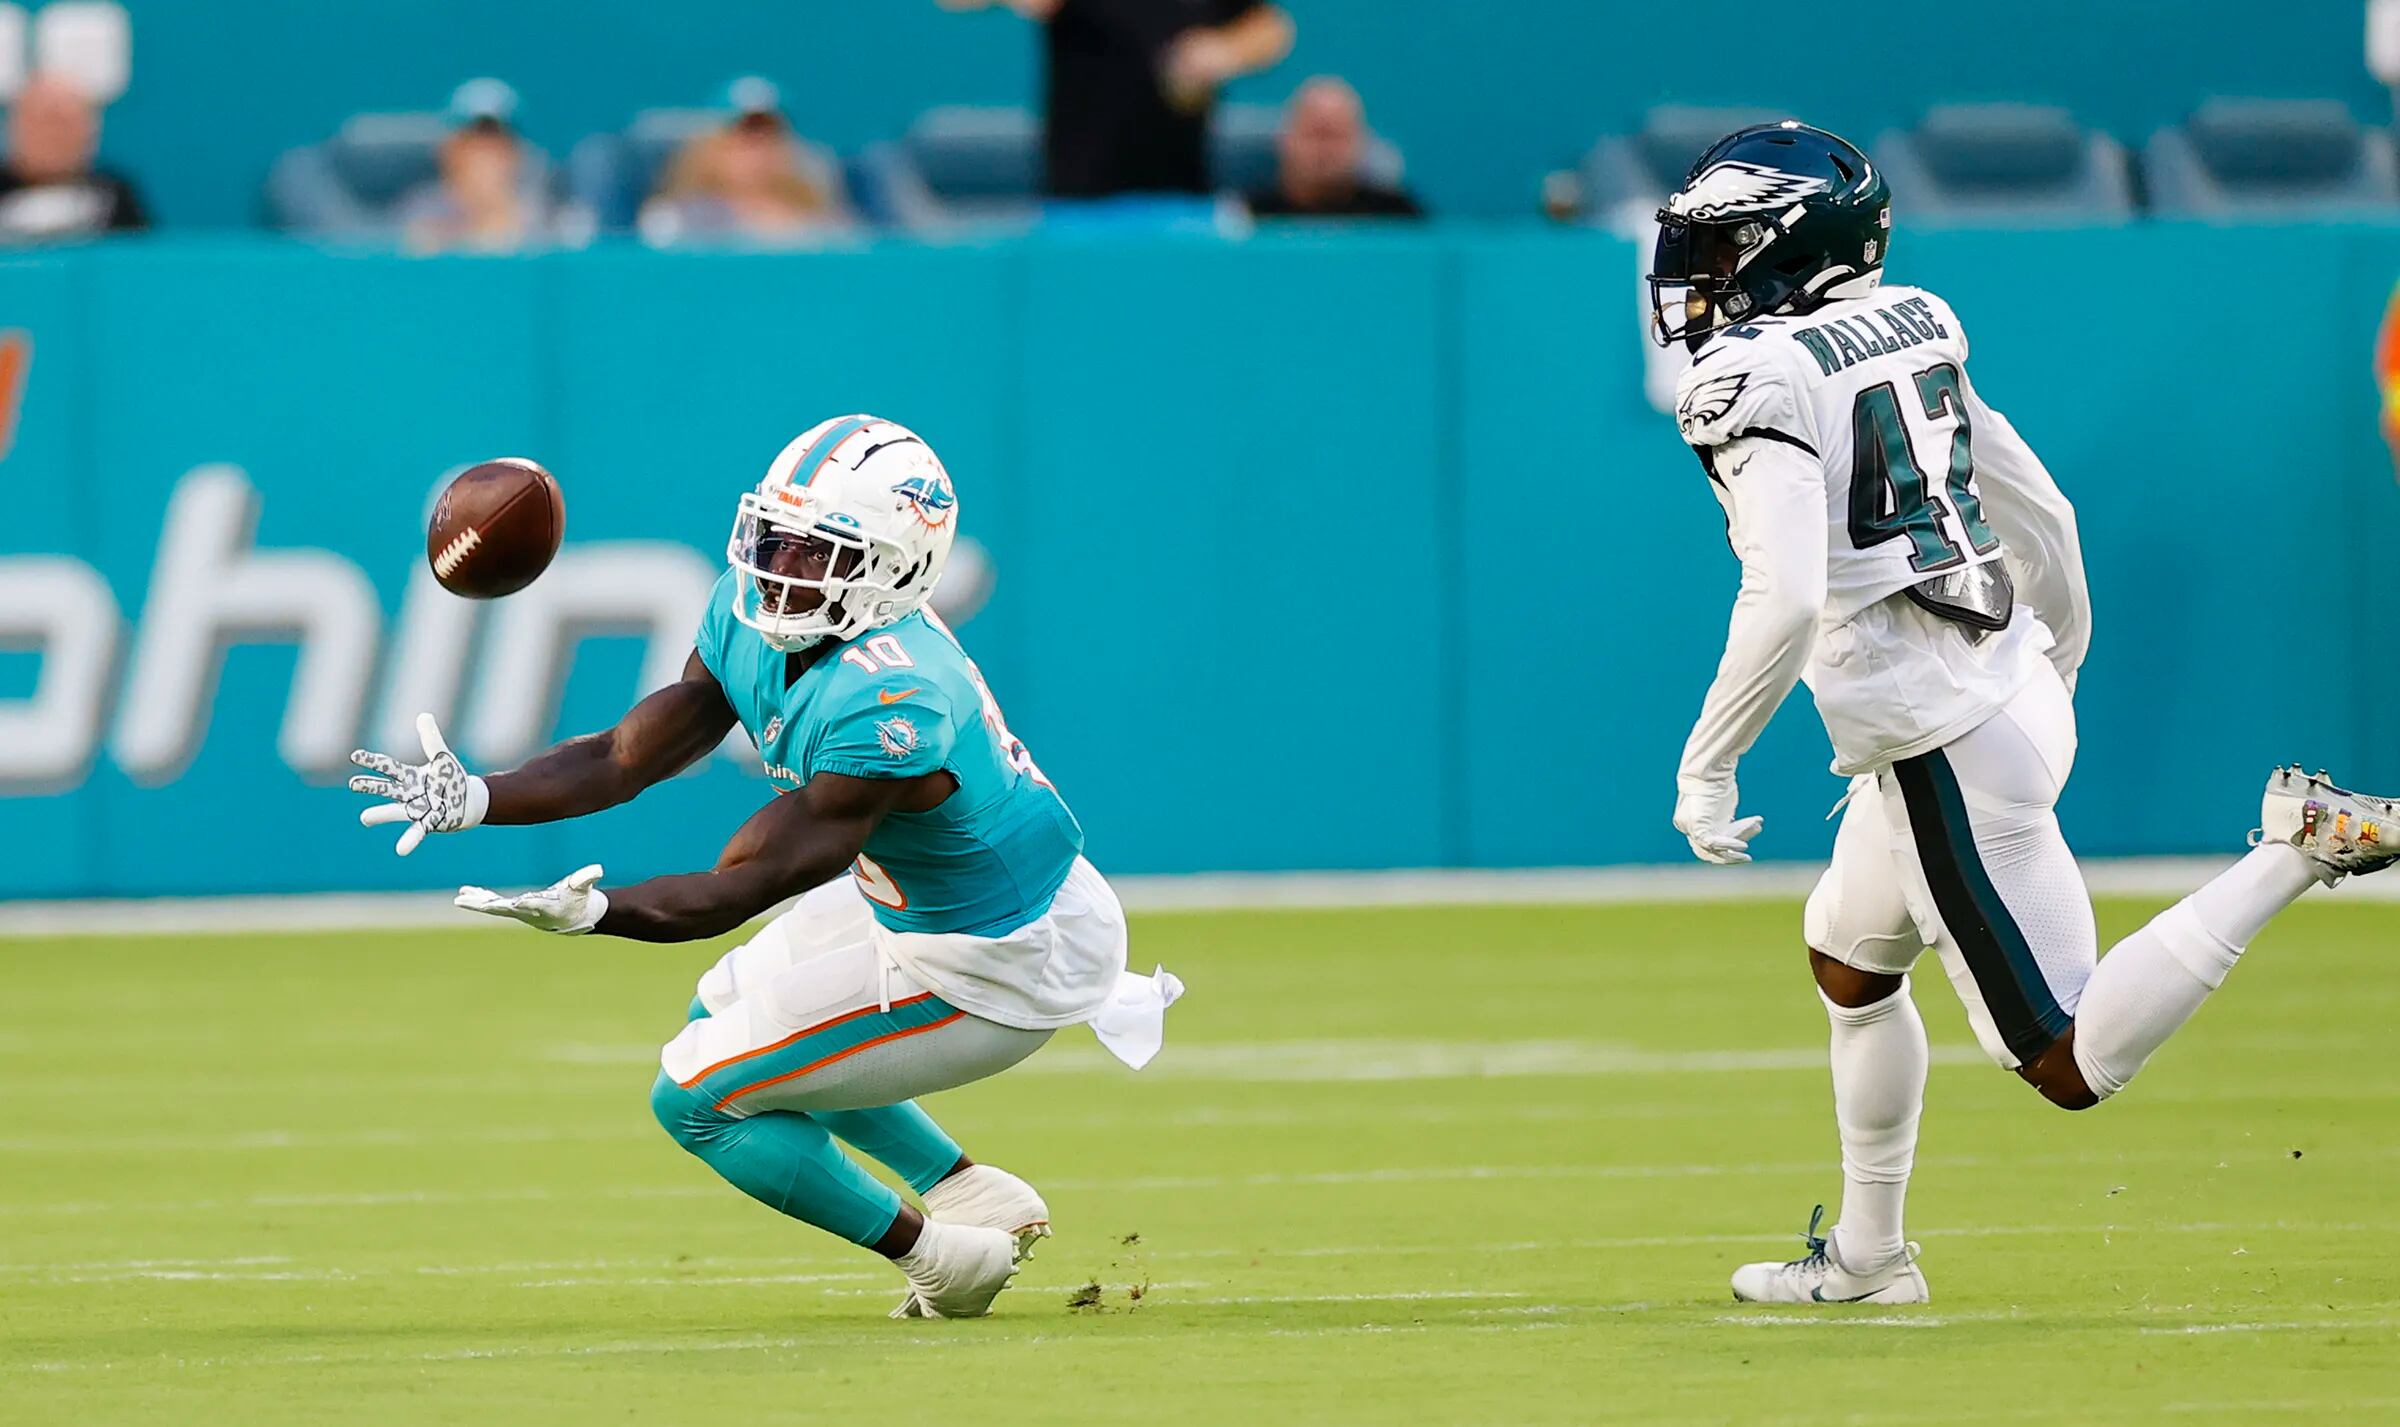 Photos from the Eagles preseason game loss to the Dolphins